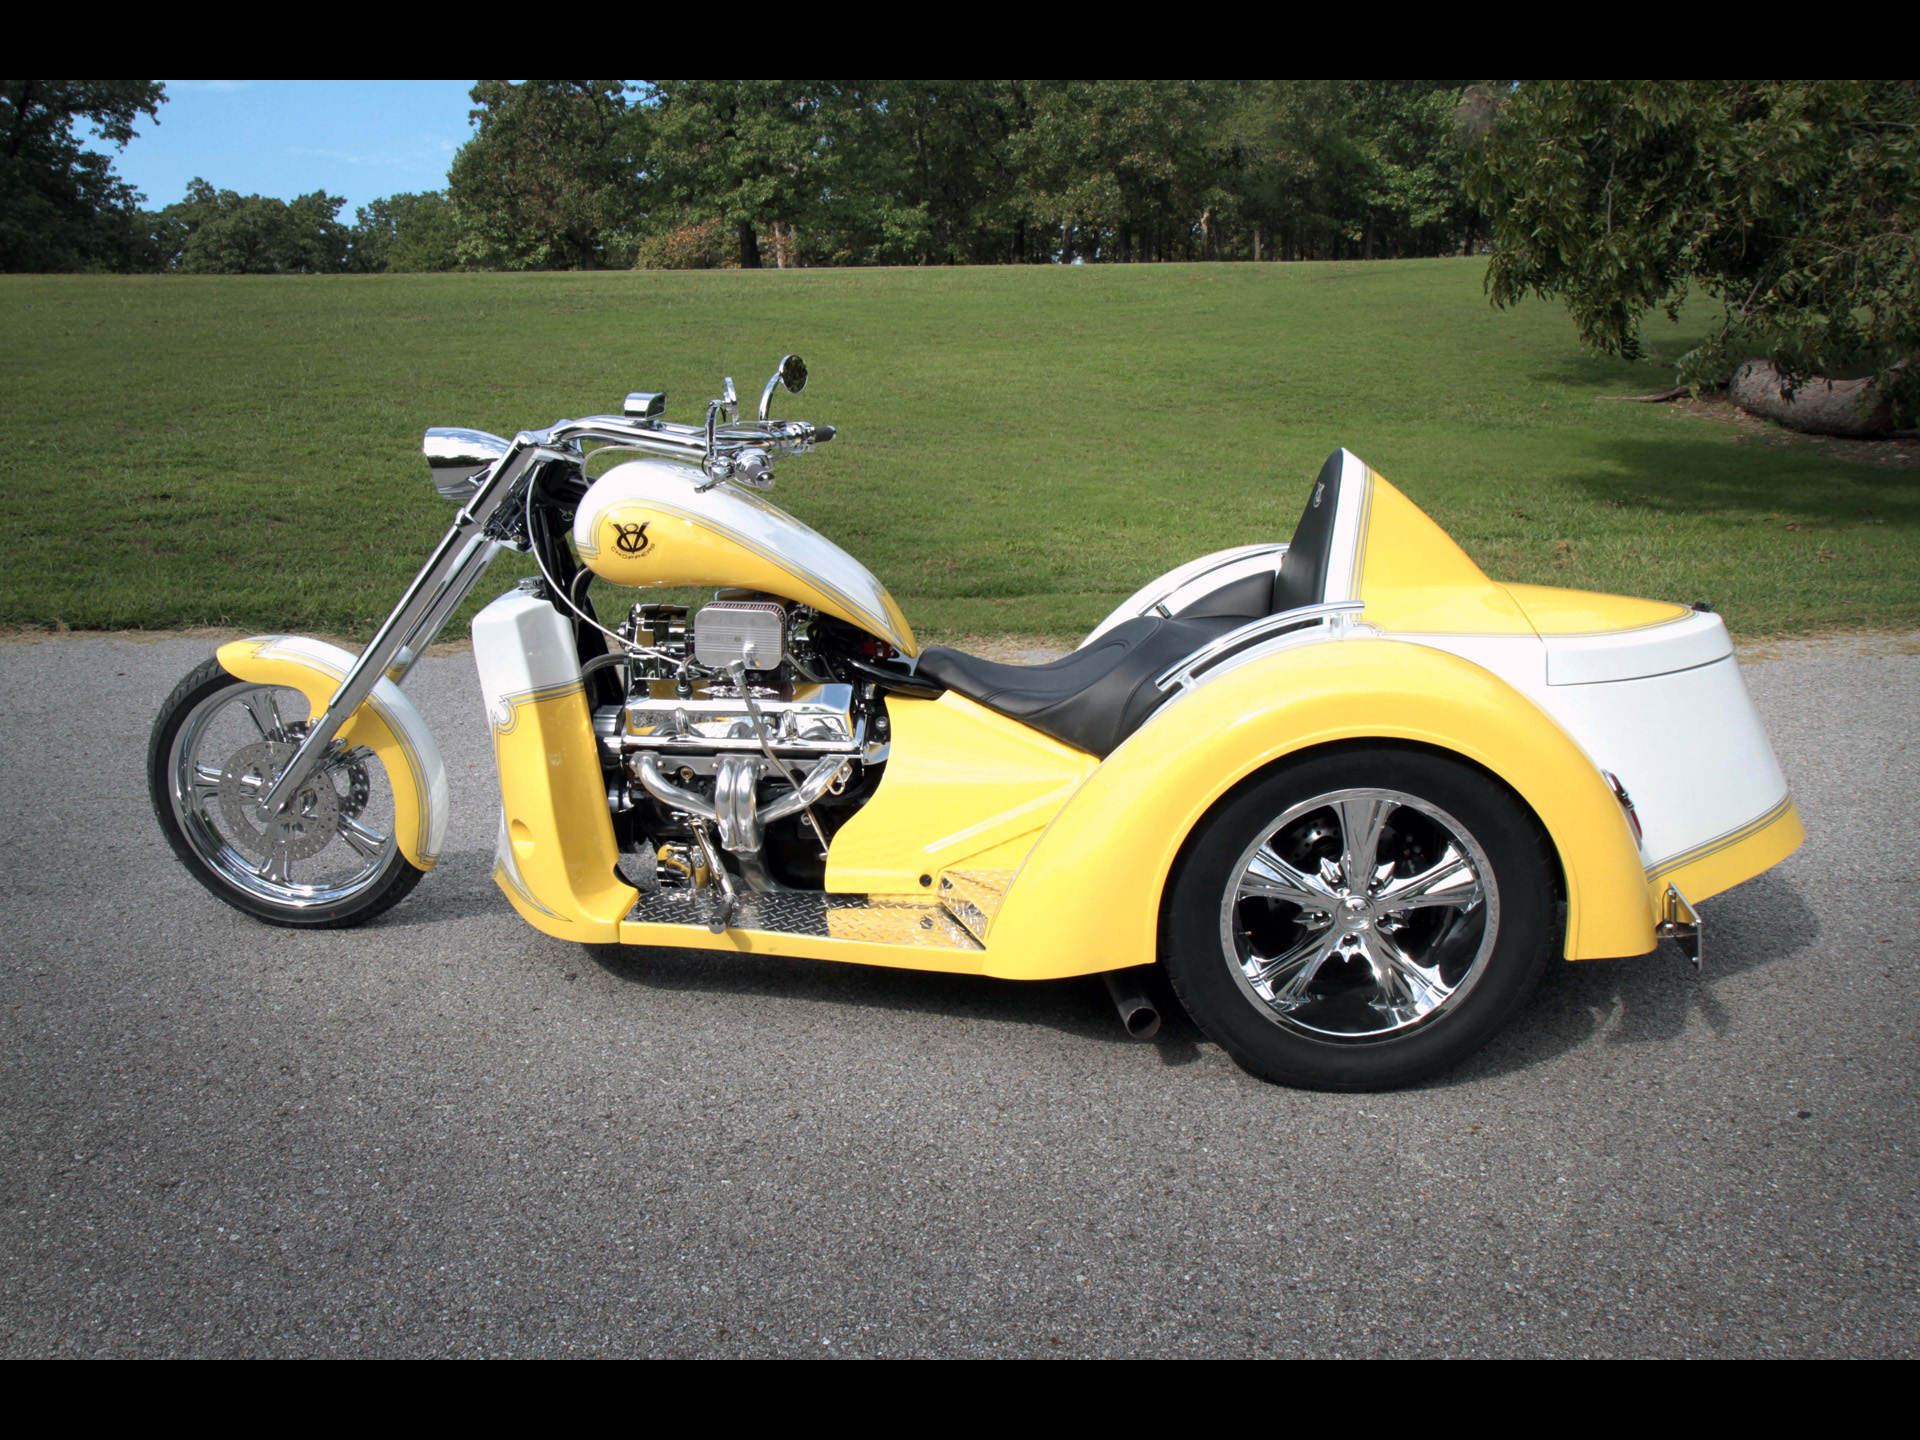 2011, V8 choppers, Sp series, Touring, Trike, Muscle, V 8, Chopper, Choppers, Hot, Rod, Rods, Bike, Engine, Engines Wallpaper